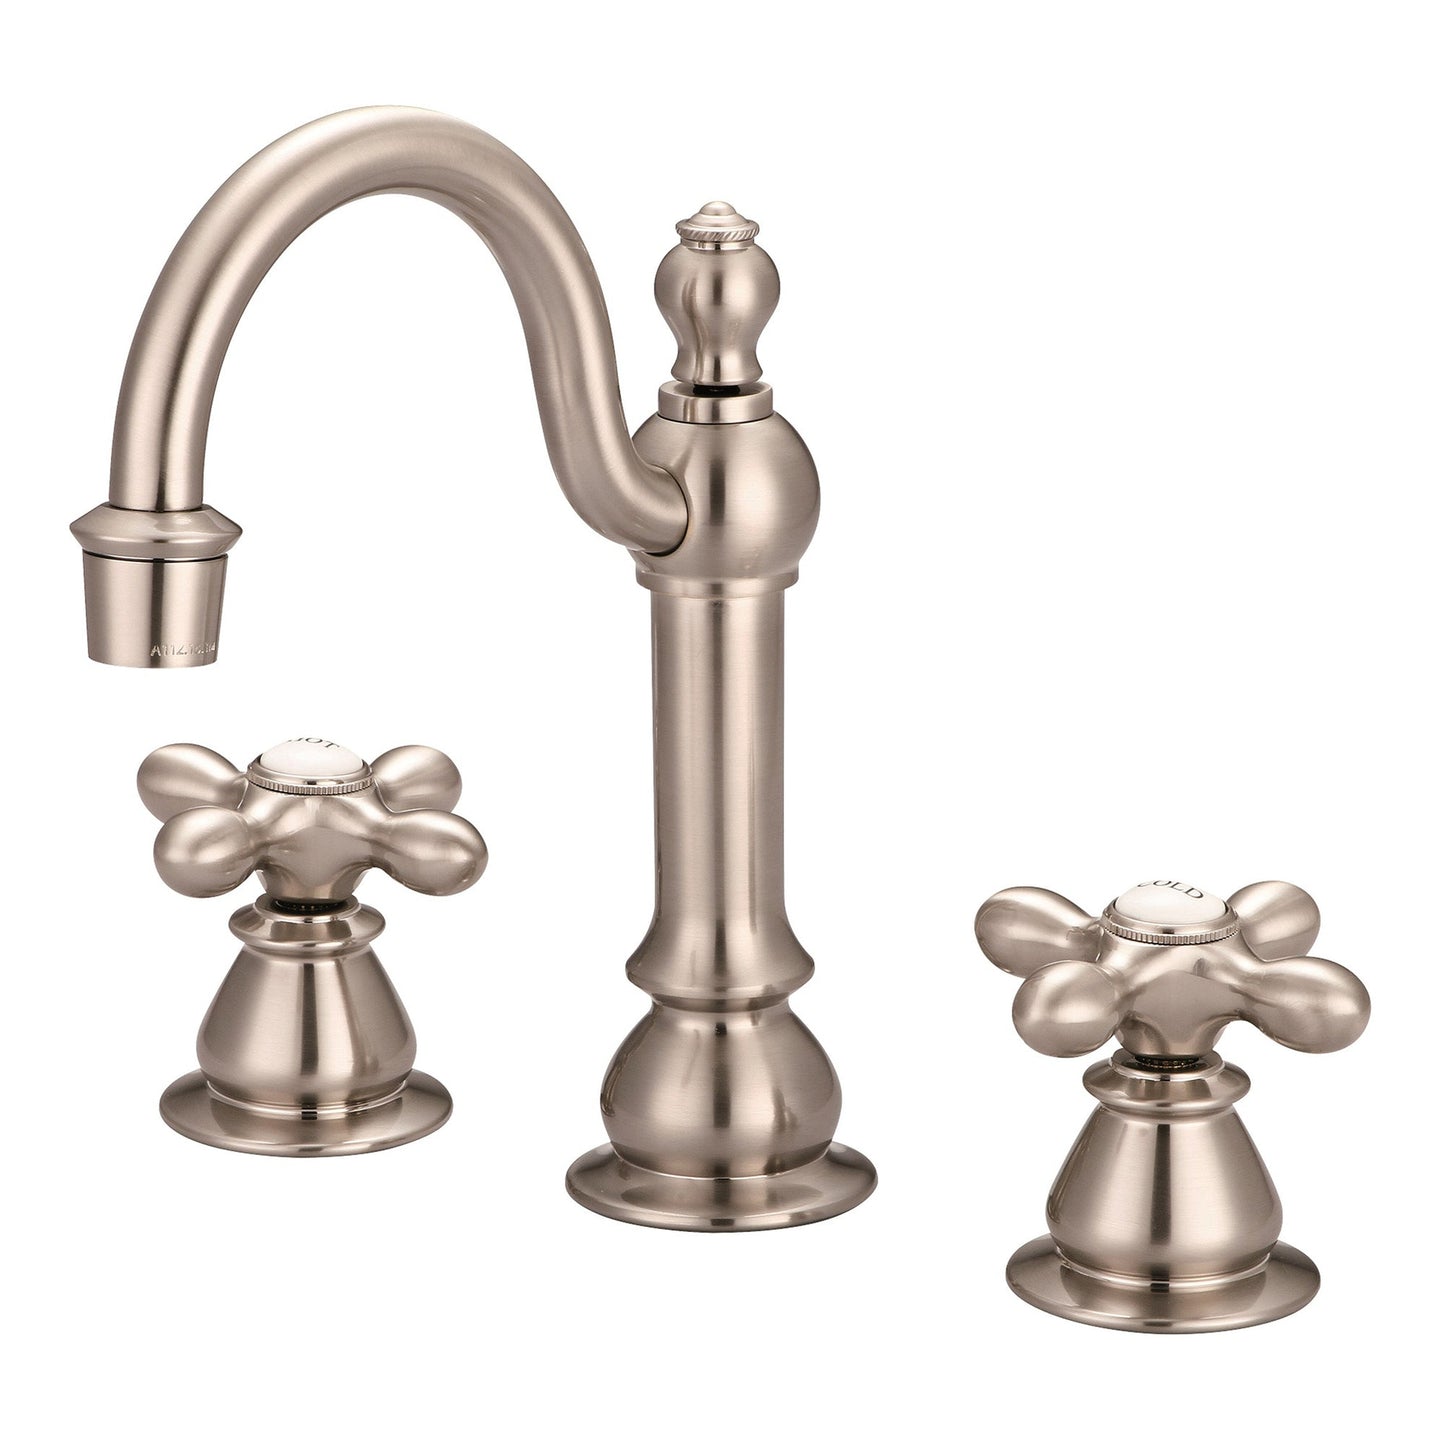 Water Creation American 20th Century Classic Widespread Lavatory F2-0012 8" Grey Solid Brass Faucet With Pop-Up Drain And Metal Cross Handles, Hot And Cold Labels Included